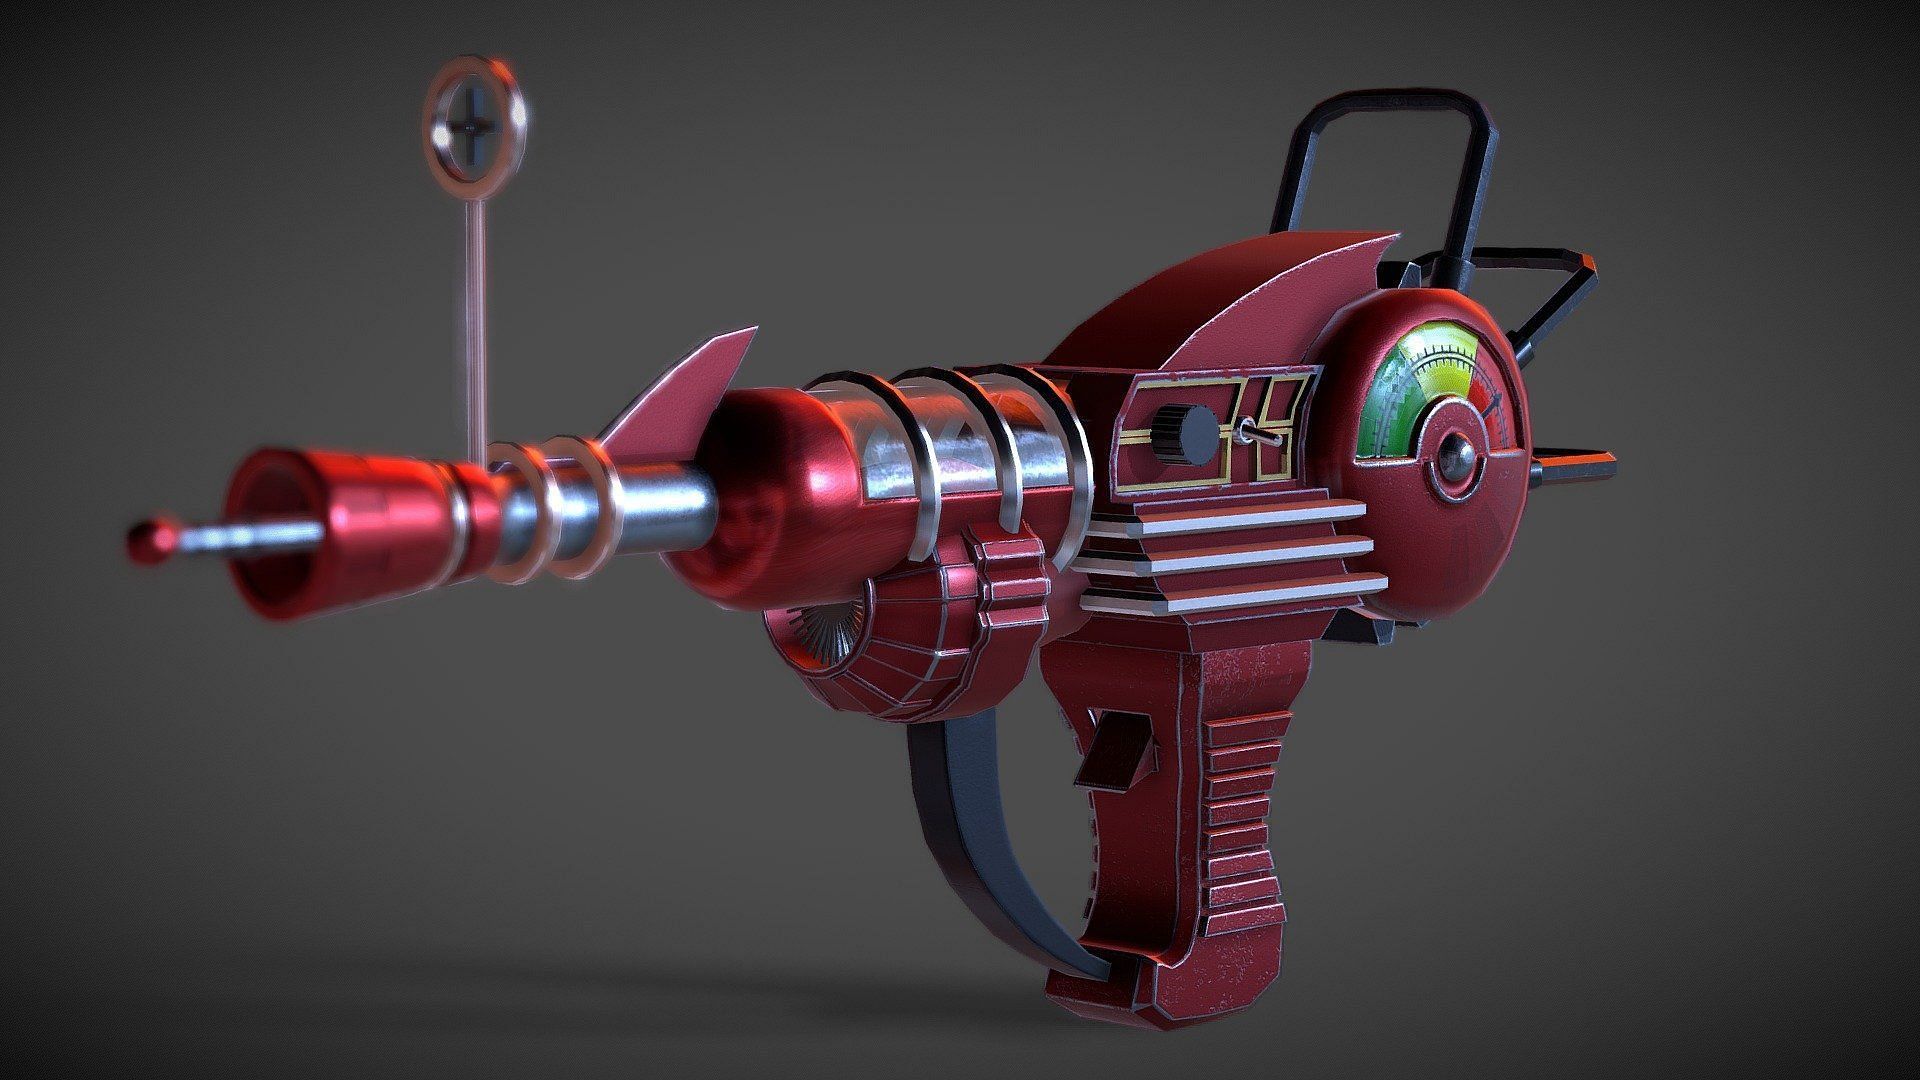 Leaks suggest the Ray Gun is coming to COD Mobile in the upcoming seasons while the Undead Siege mode is getting removed (Image via Activision)